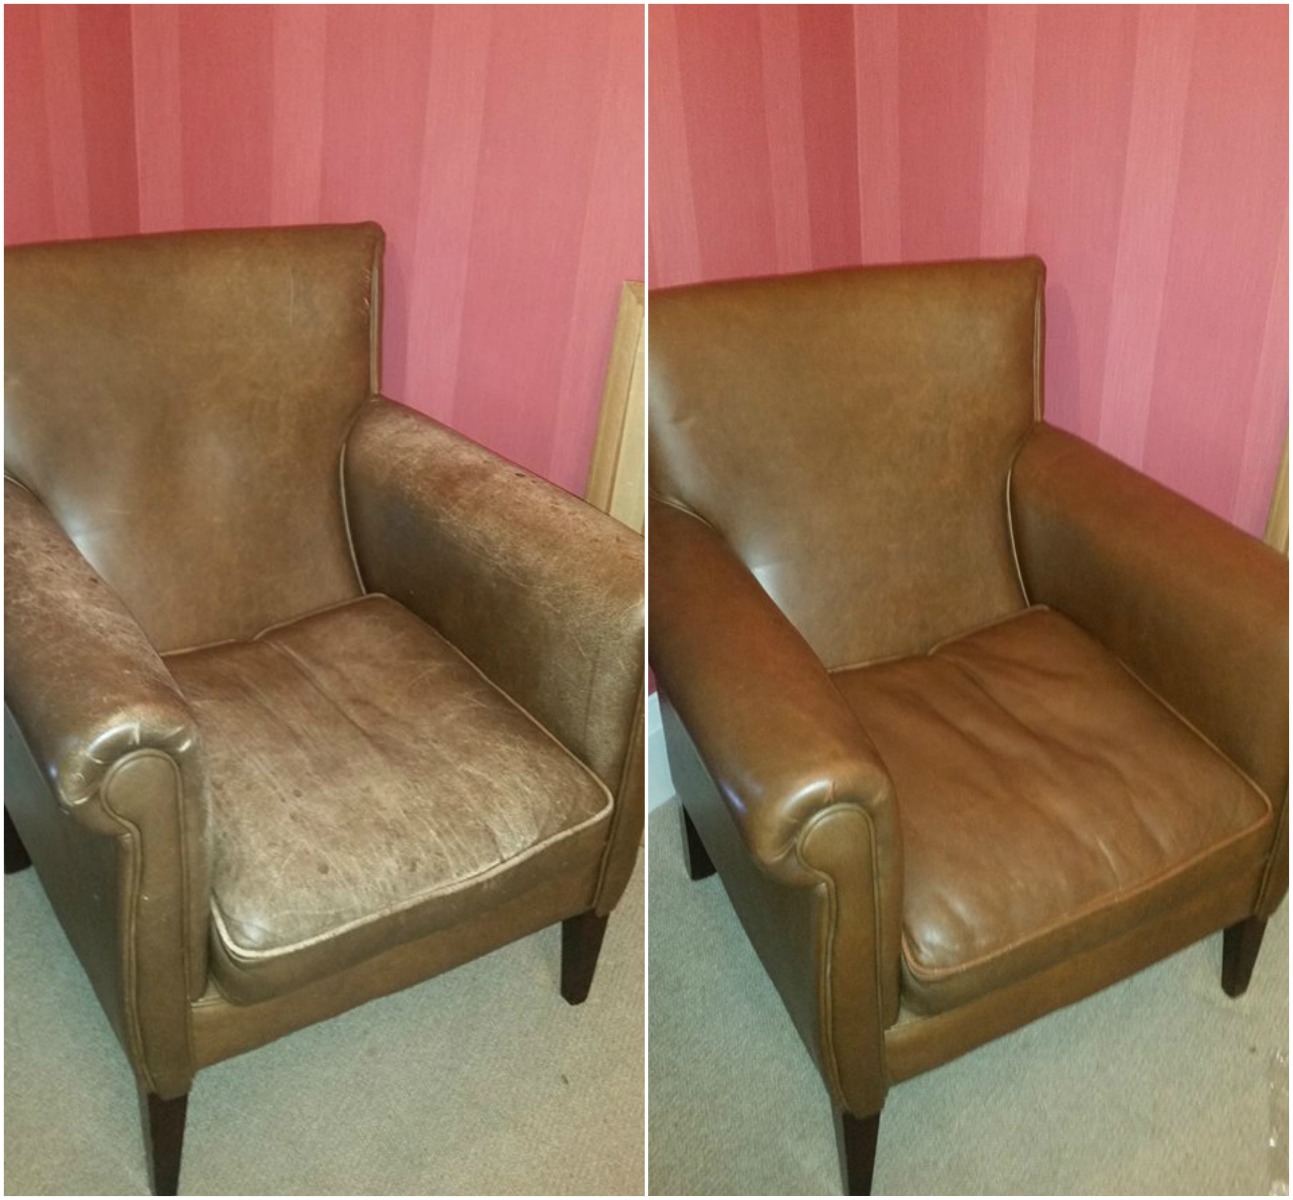 Restoring Colour To A Faded Leather Sofa, Restoring Sun Damaged Leather Couch